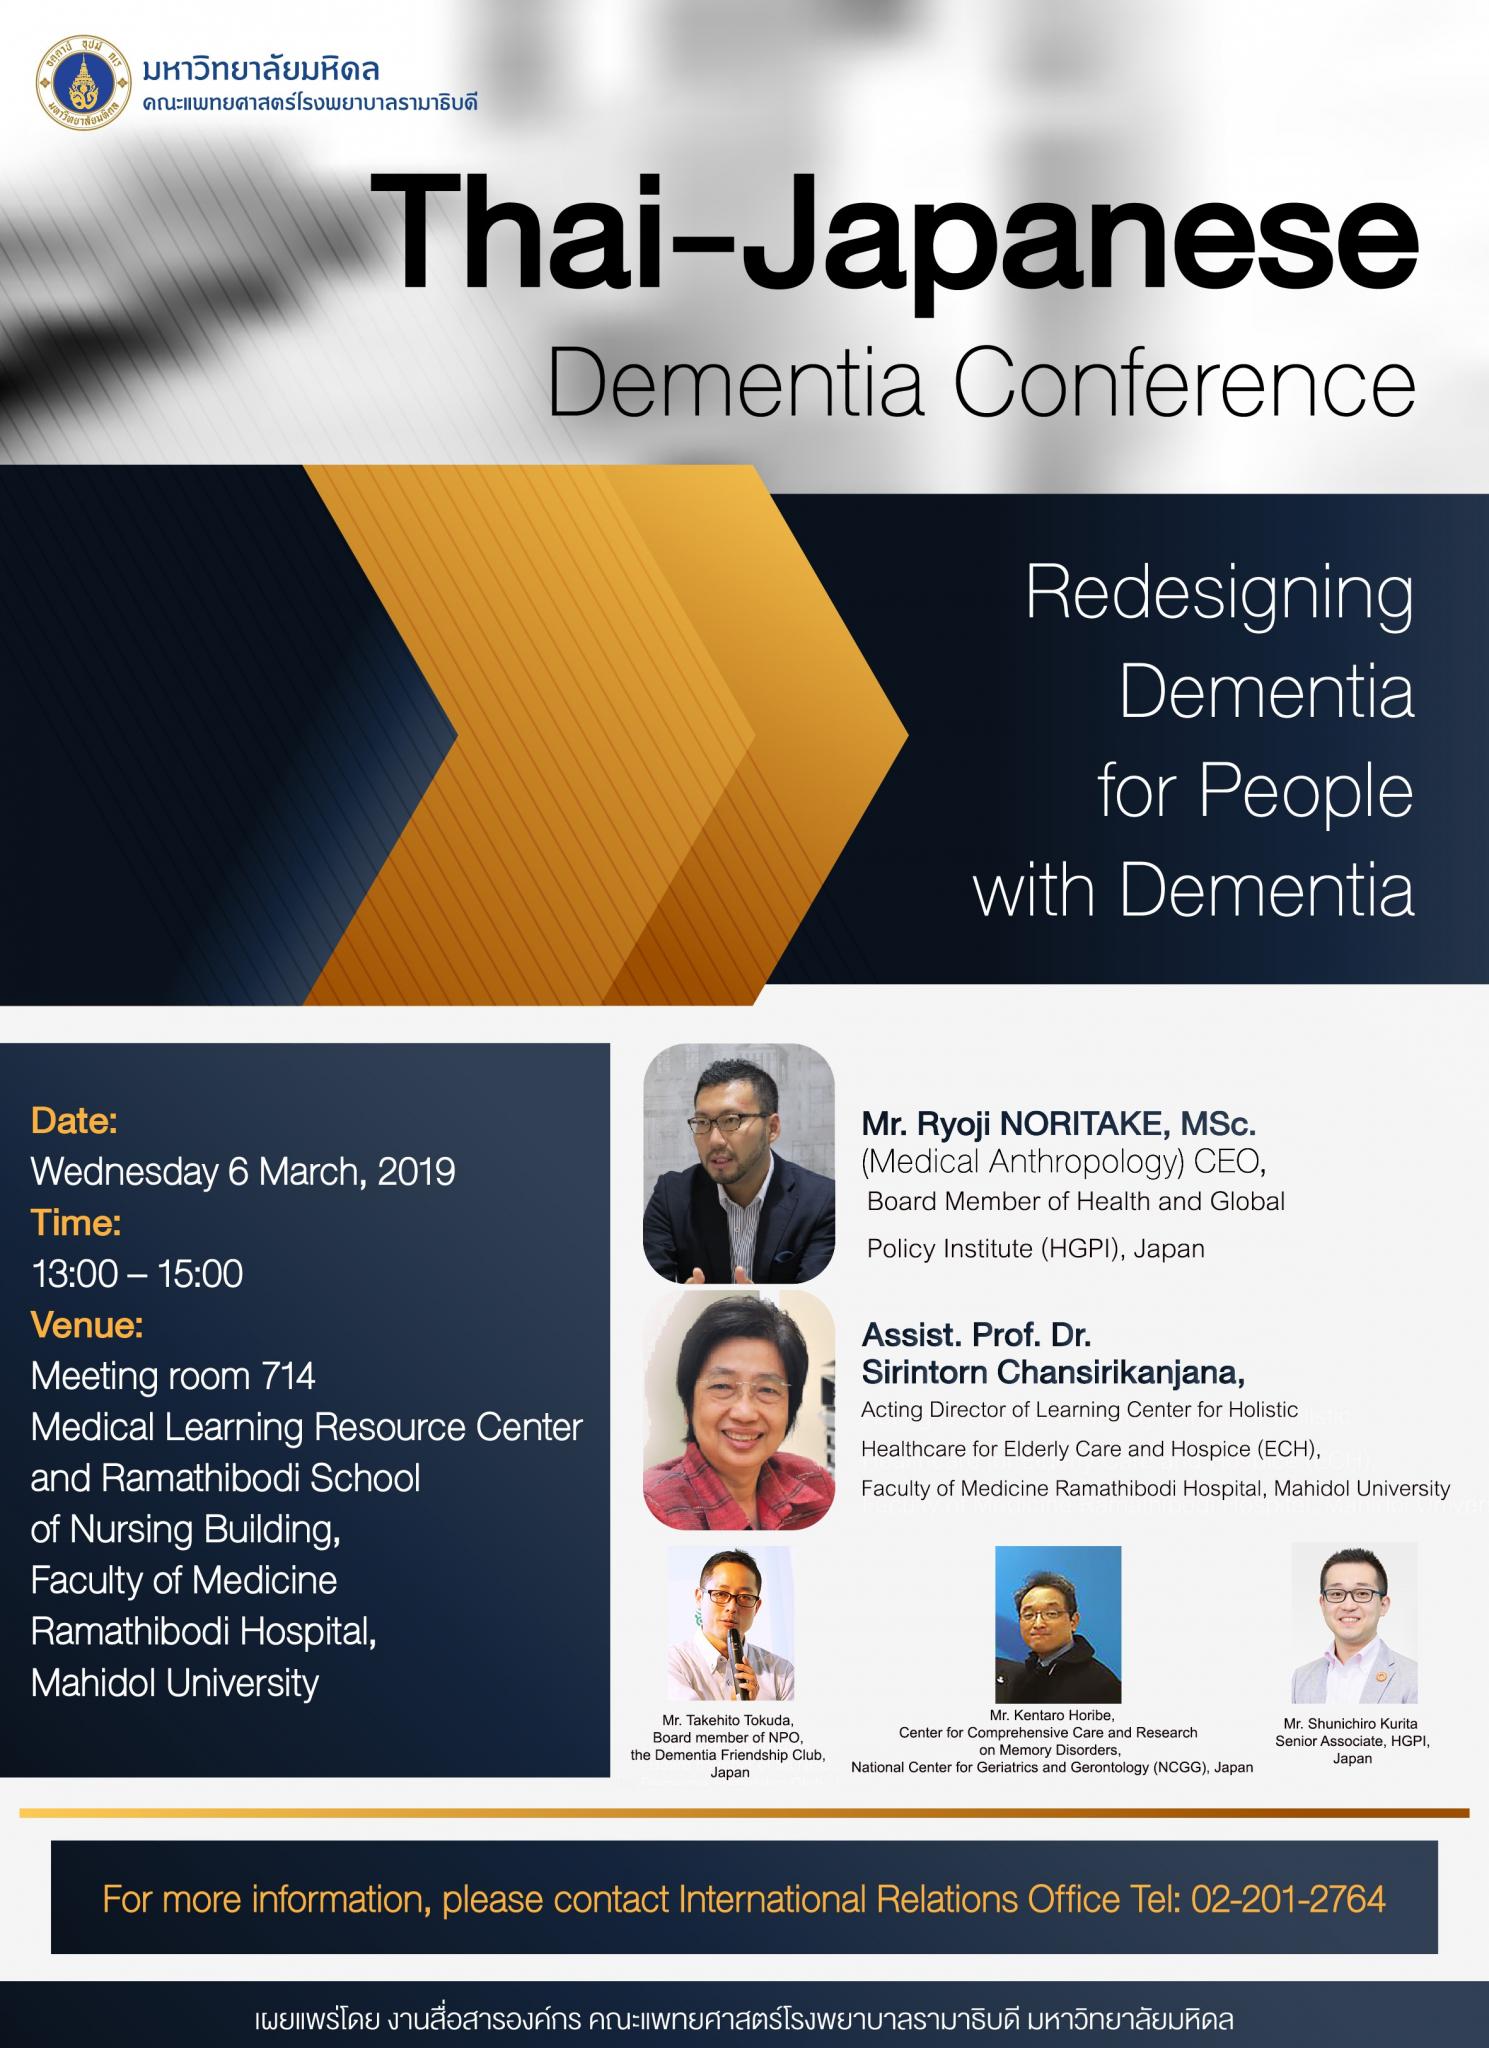 Thai-Japanese Dementia Conference Redesigning Dementia for People with Dementia